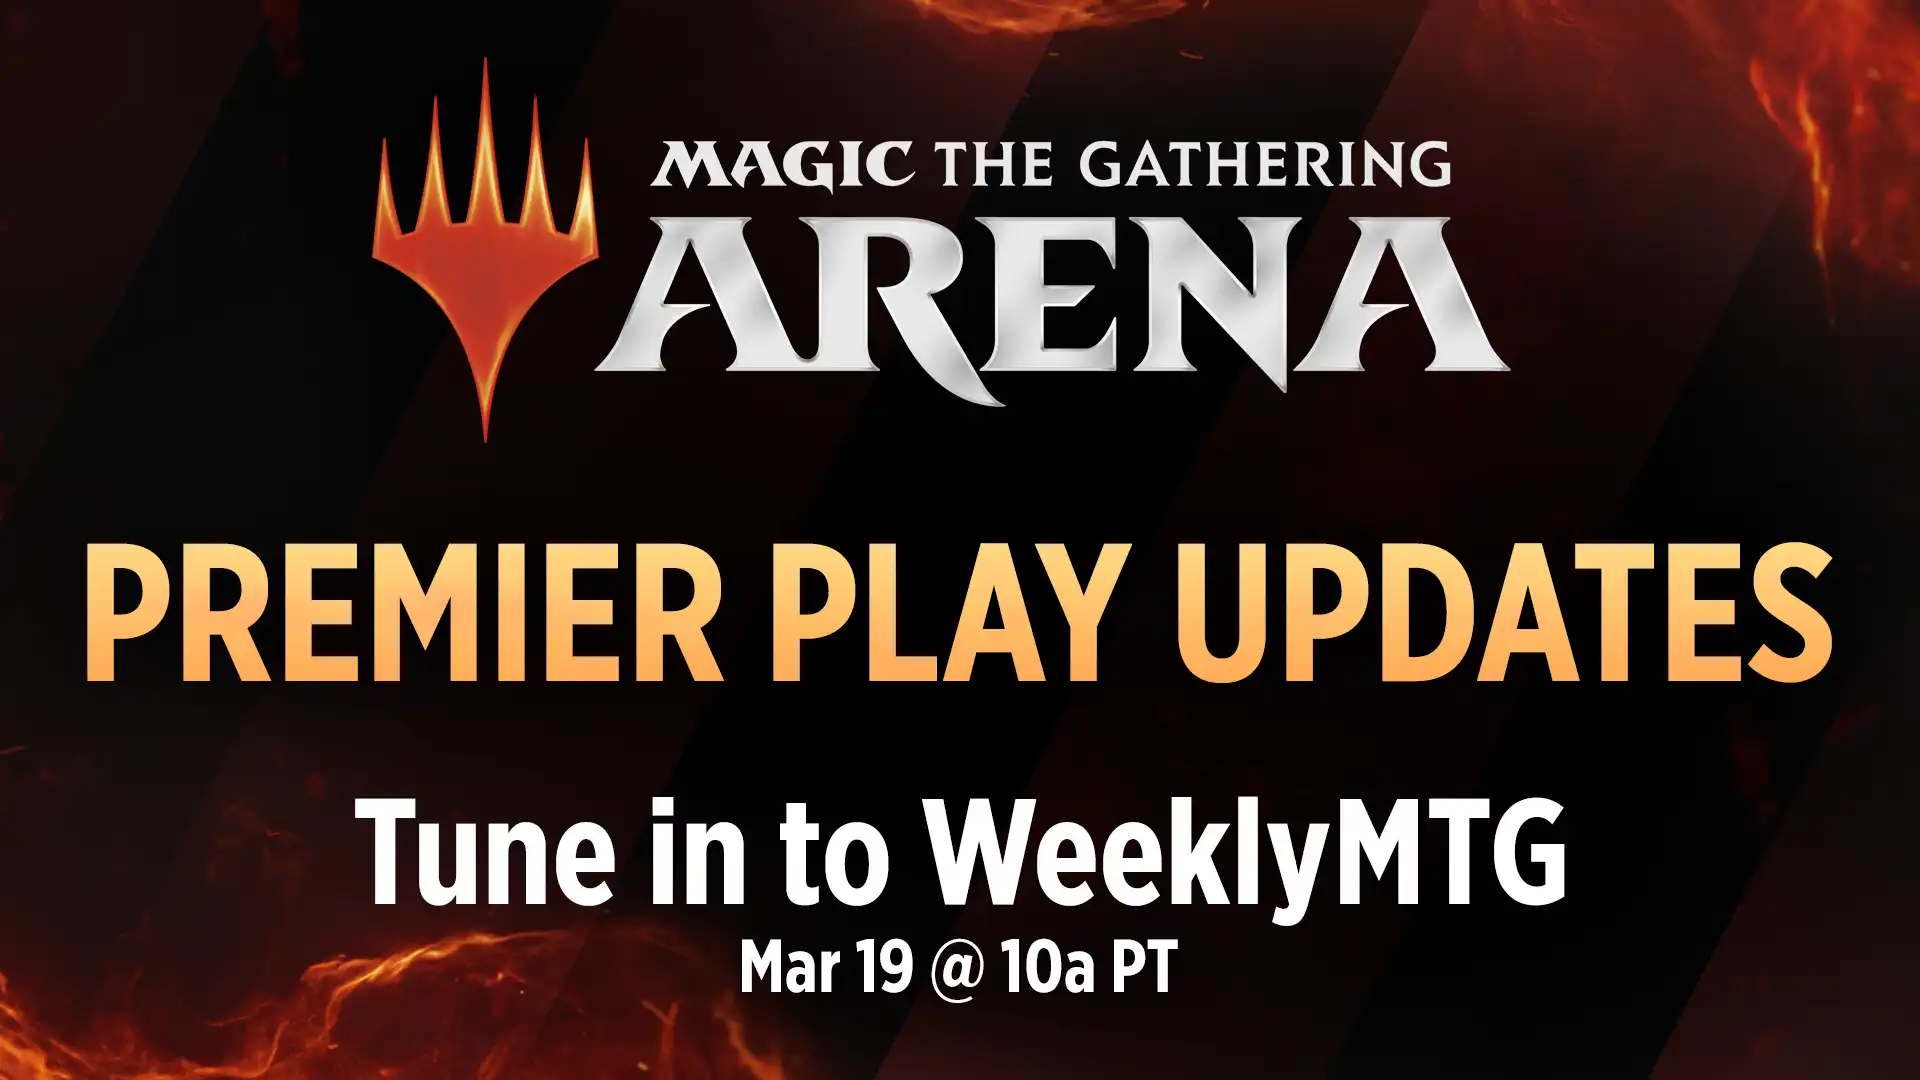 Premier Play Updates, tune in to WeeklyMTG March 19 at 10 a.m. PT